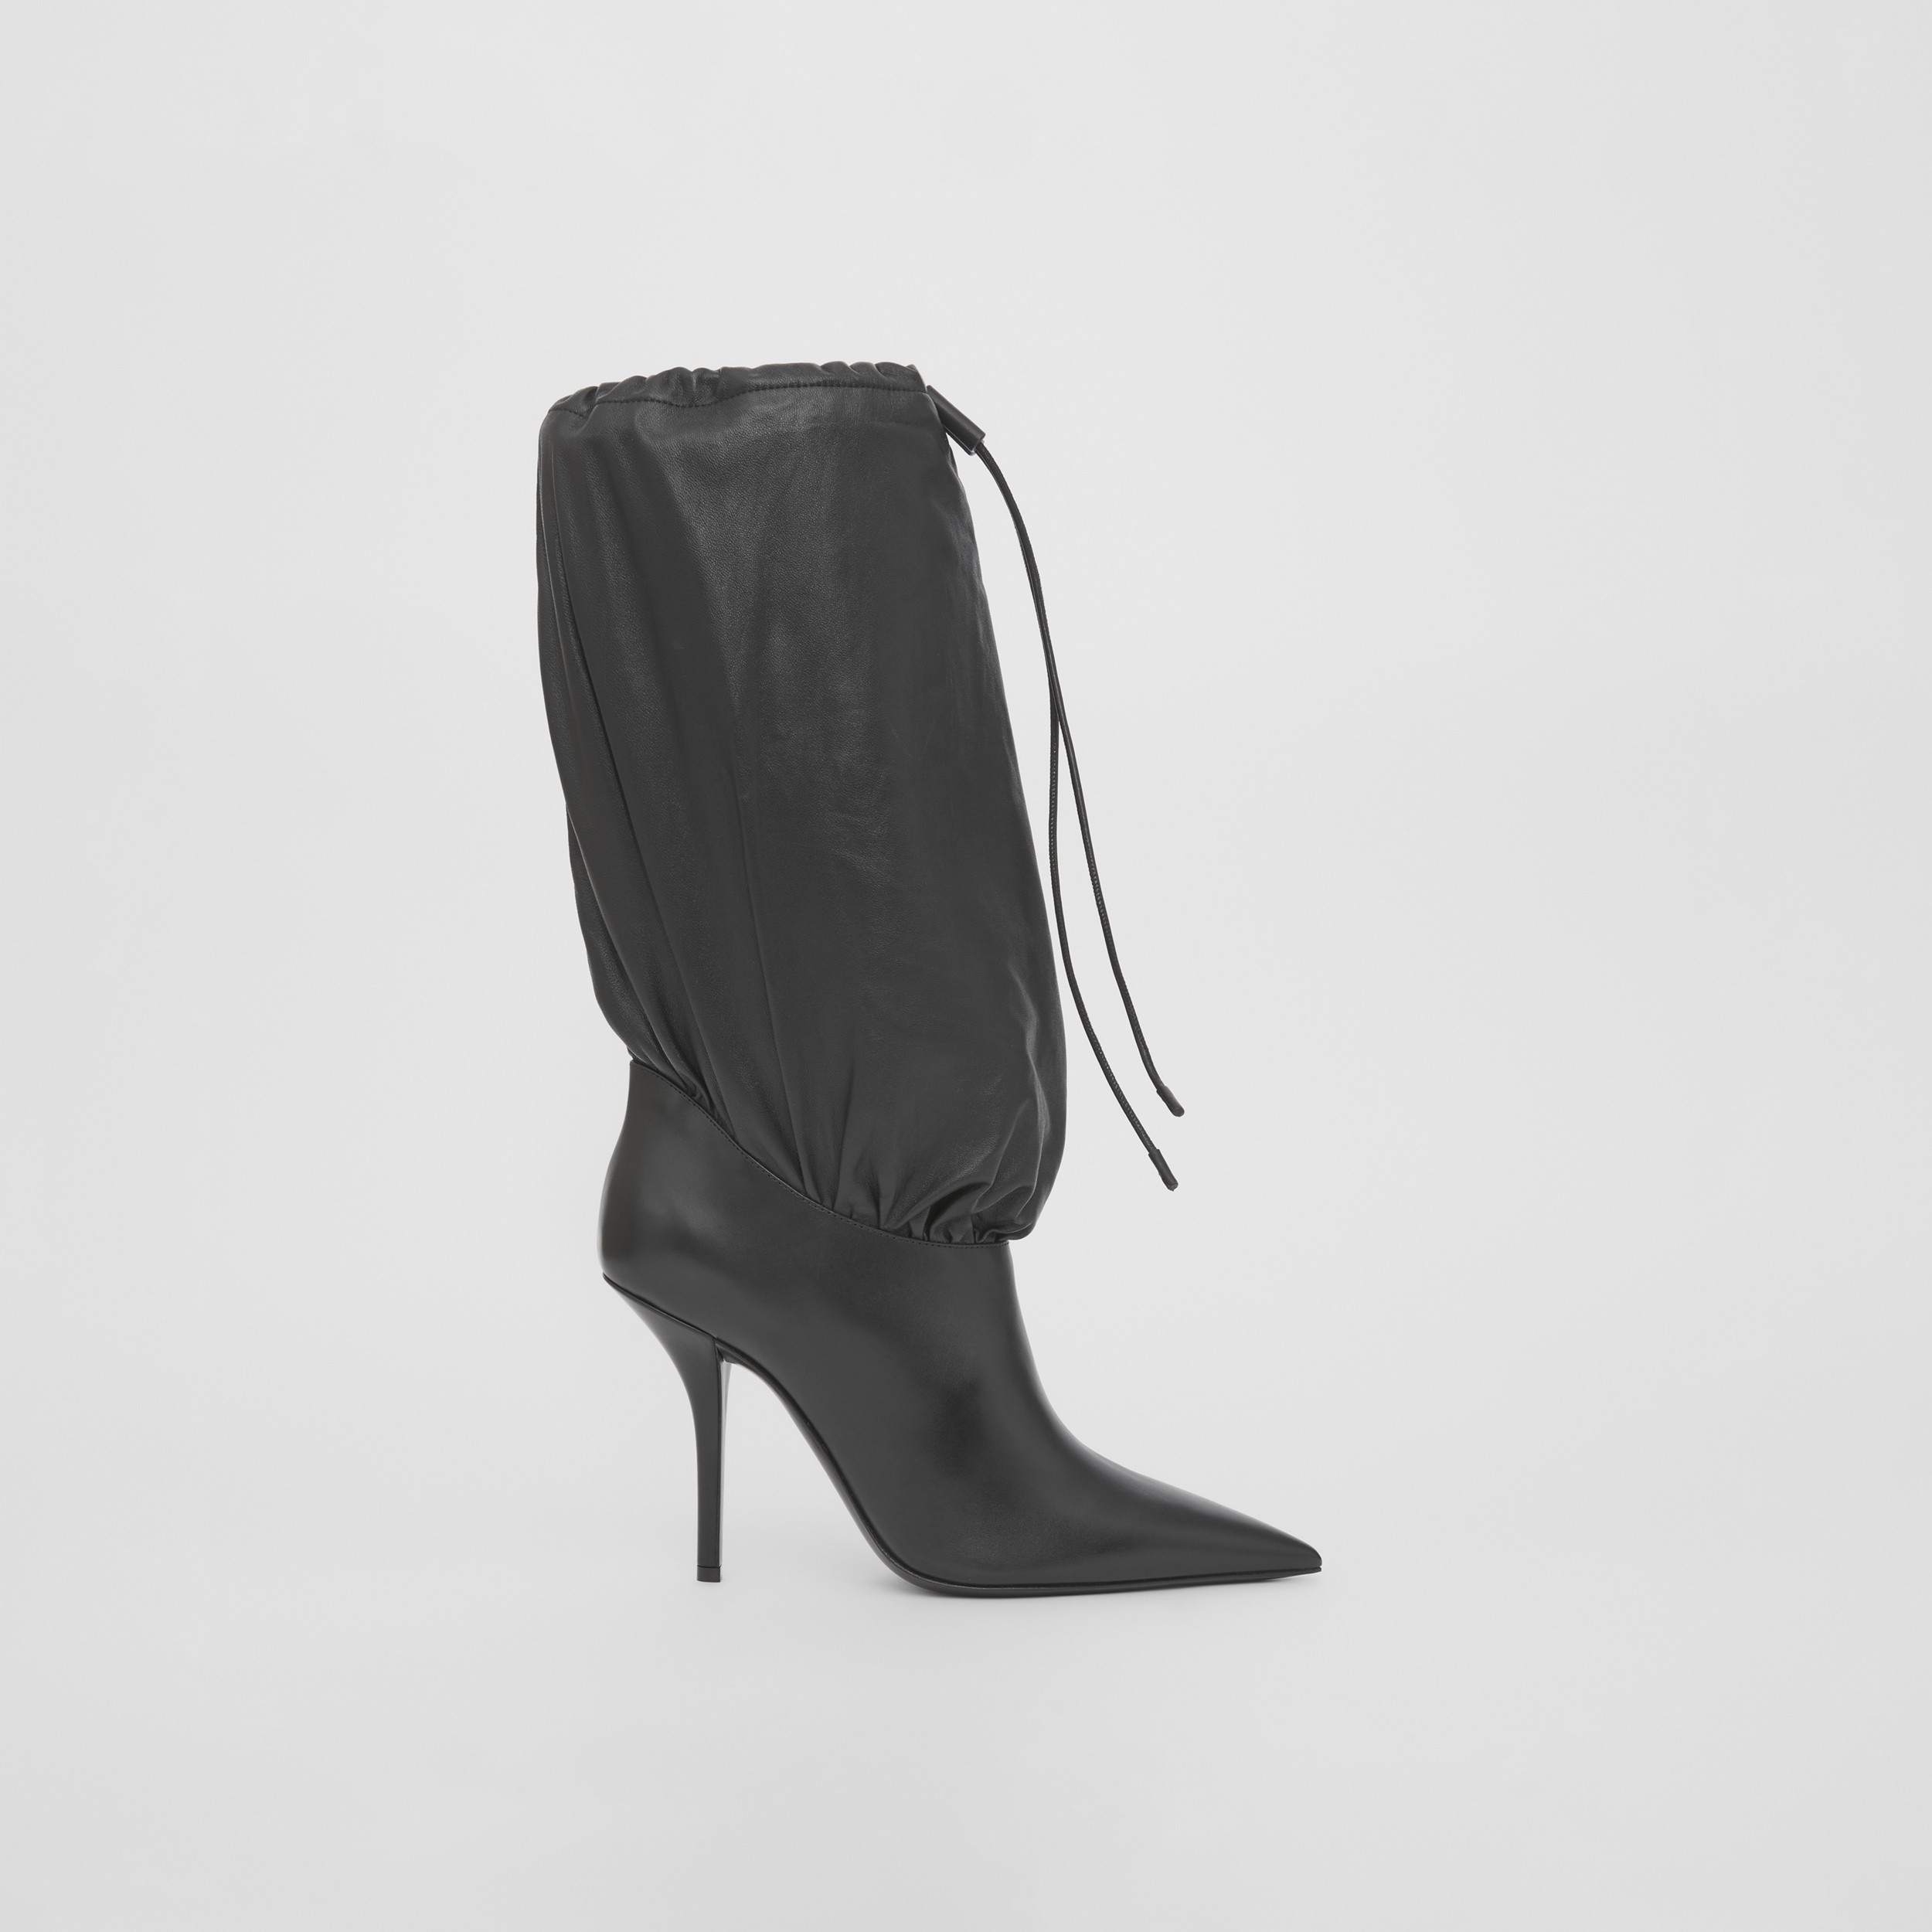 burberry.com | Leather and Plongé Lambskin Drawcord BootsPrice £990